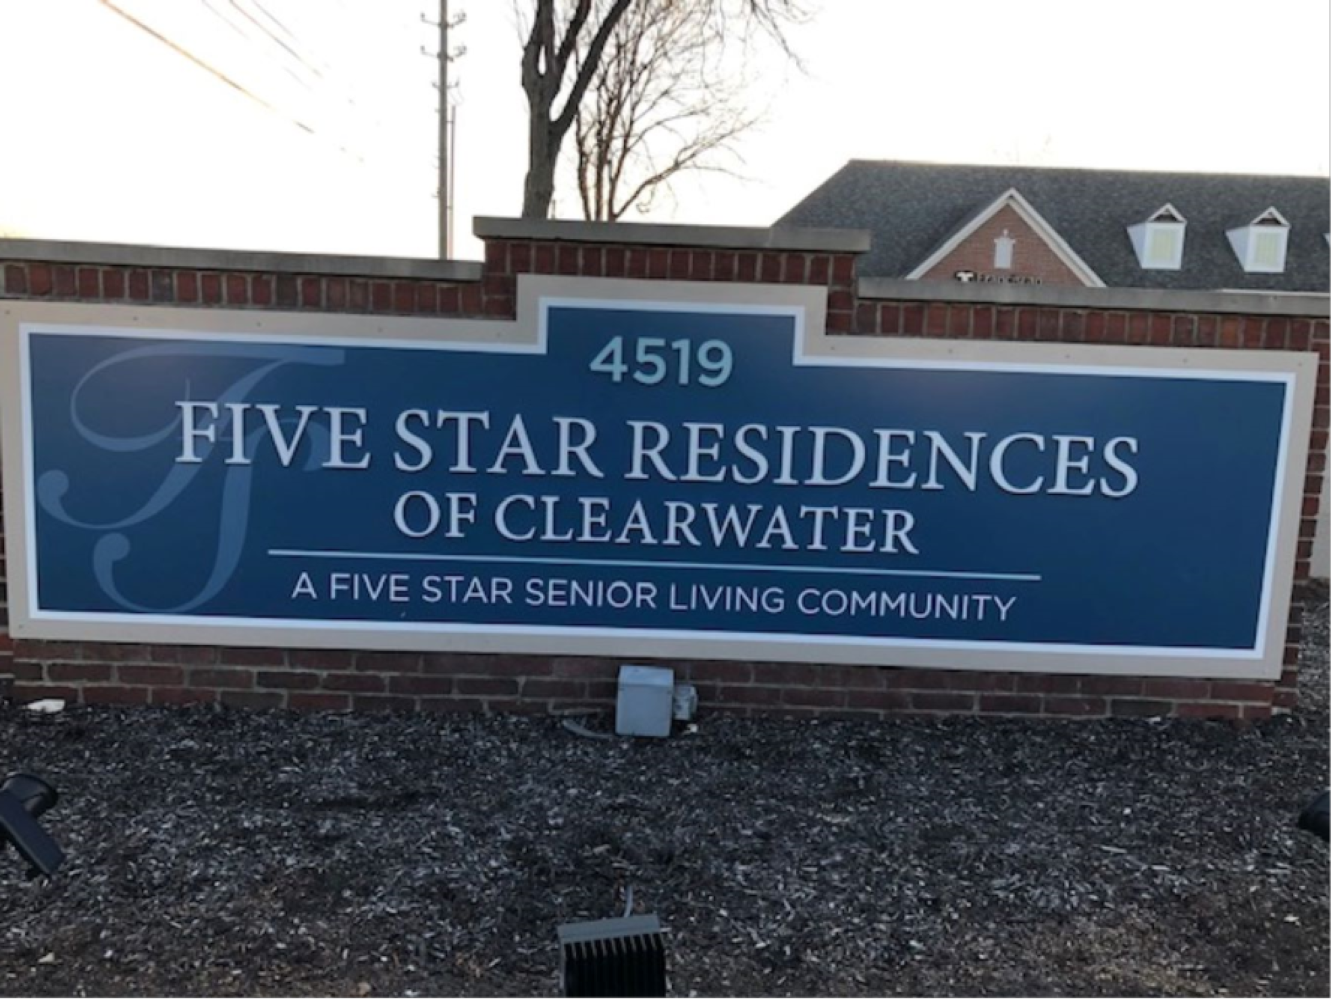 Five Star Residences of Clearwater image